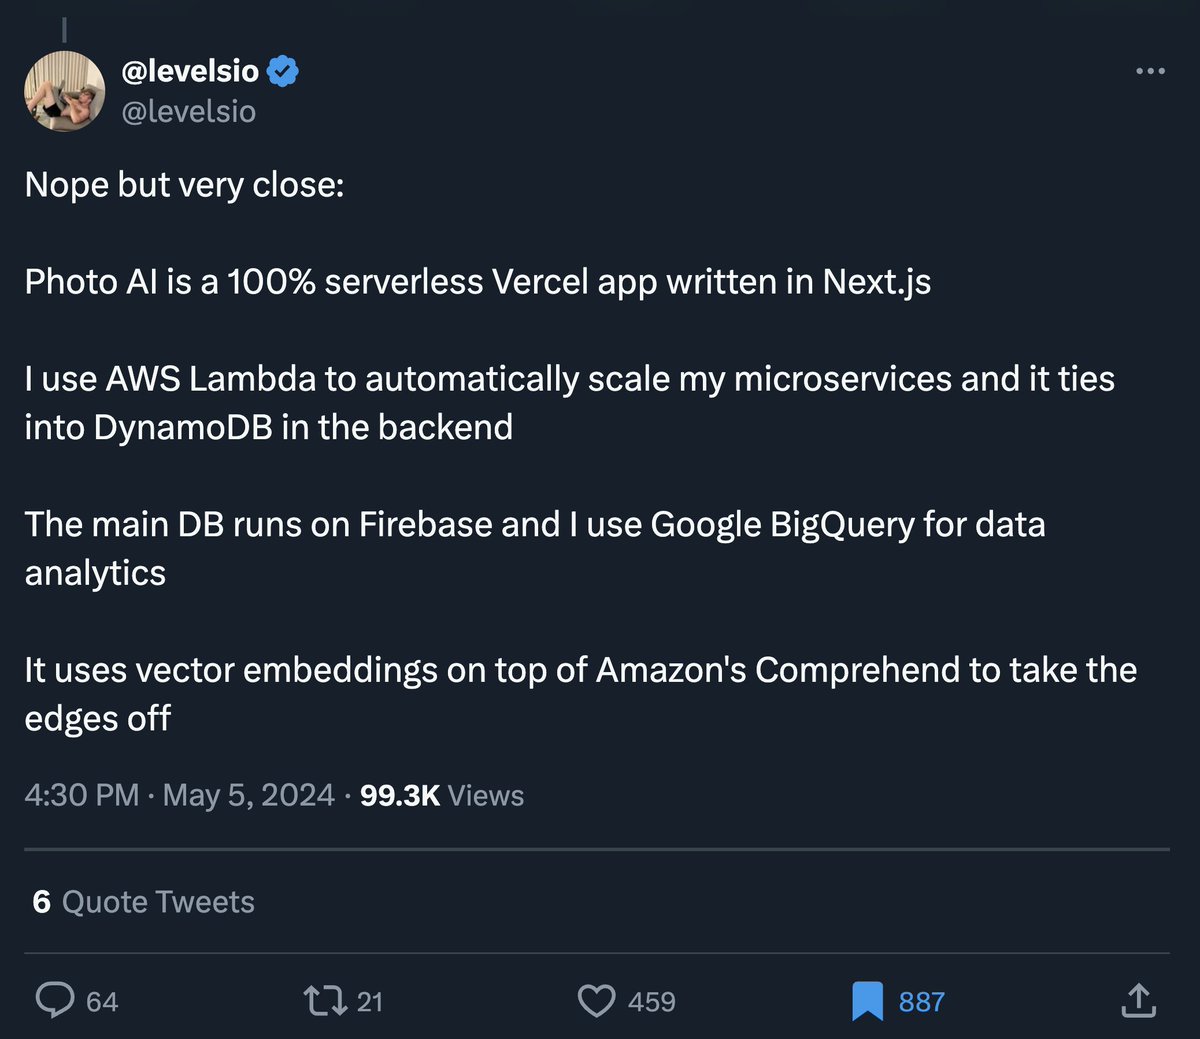 If you wanna know how overengineering in web dev is going:

Yesterday someone asked me how I built my startup and I made up an extremely convoluted tech stack

While in fact it's built with just PHP and jQuery

At this point over 800 people have bookmarked the tweet